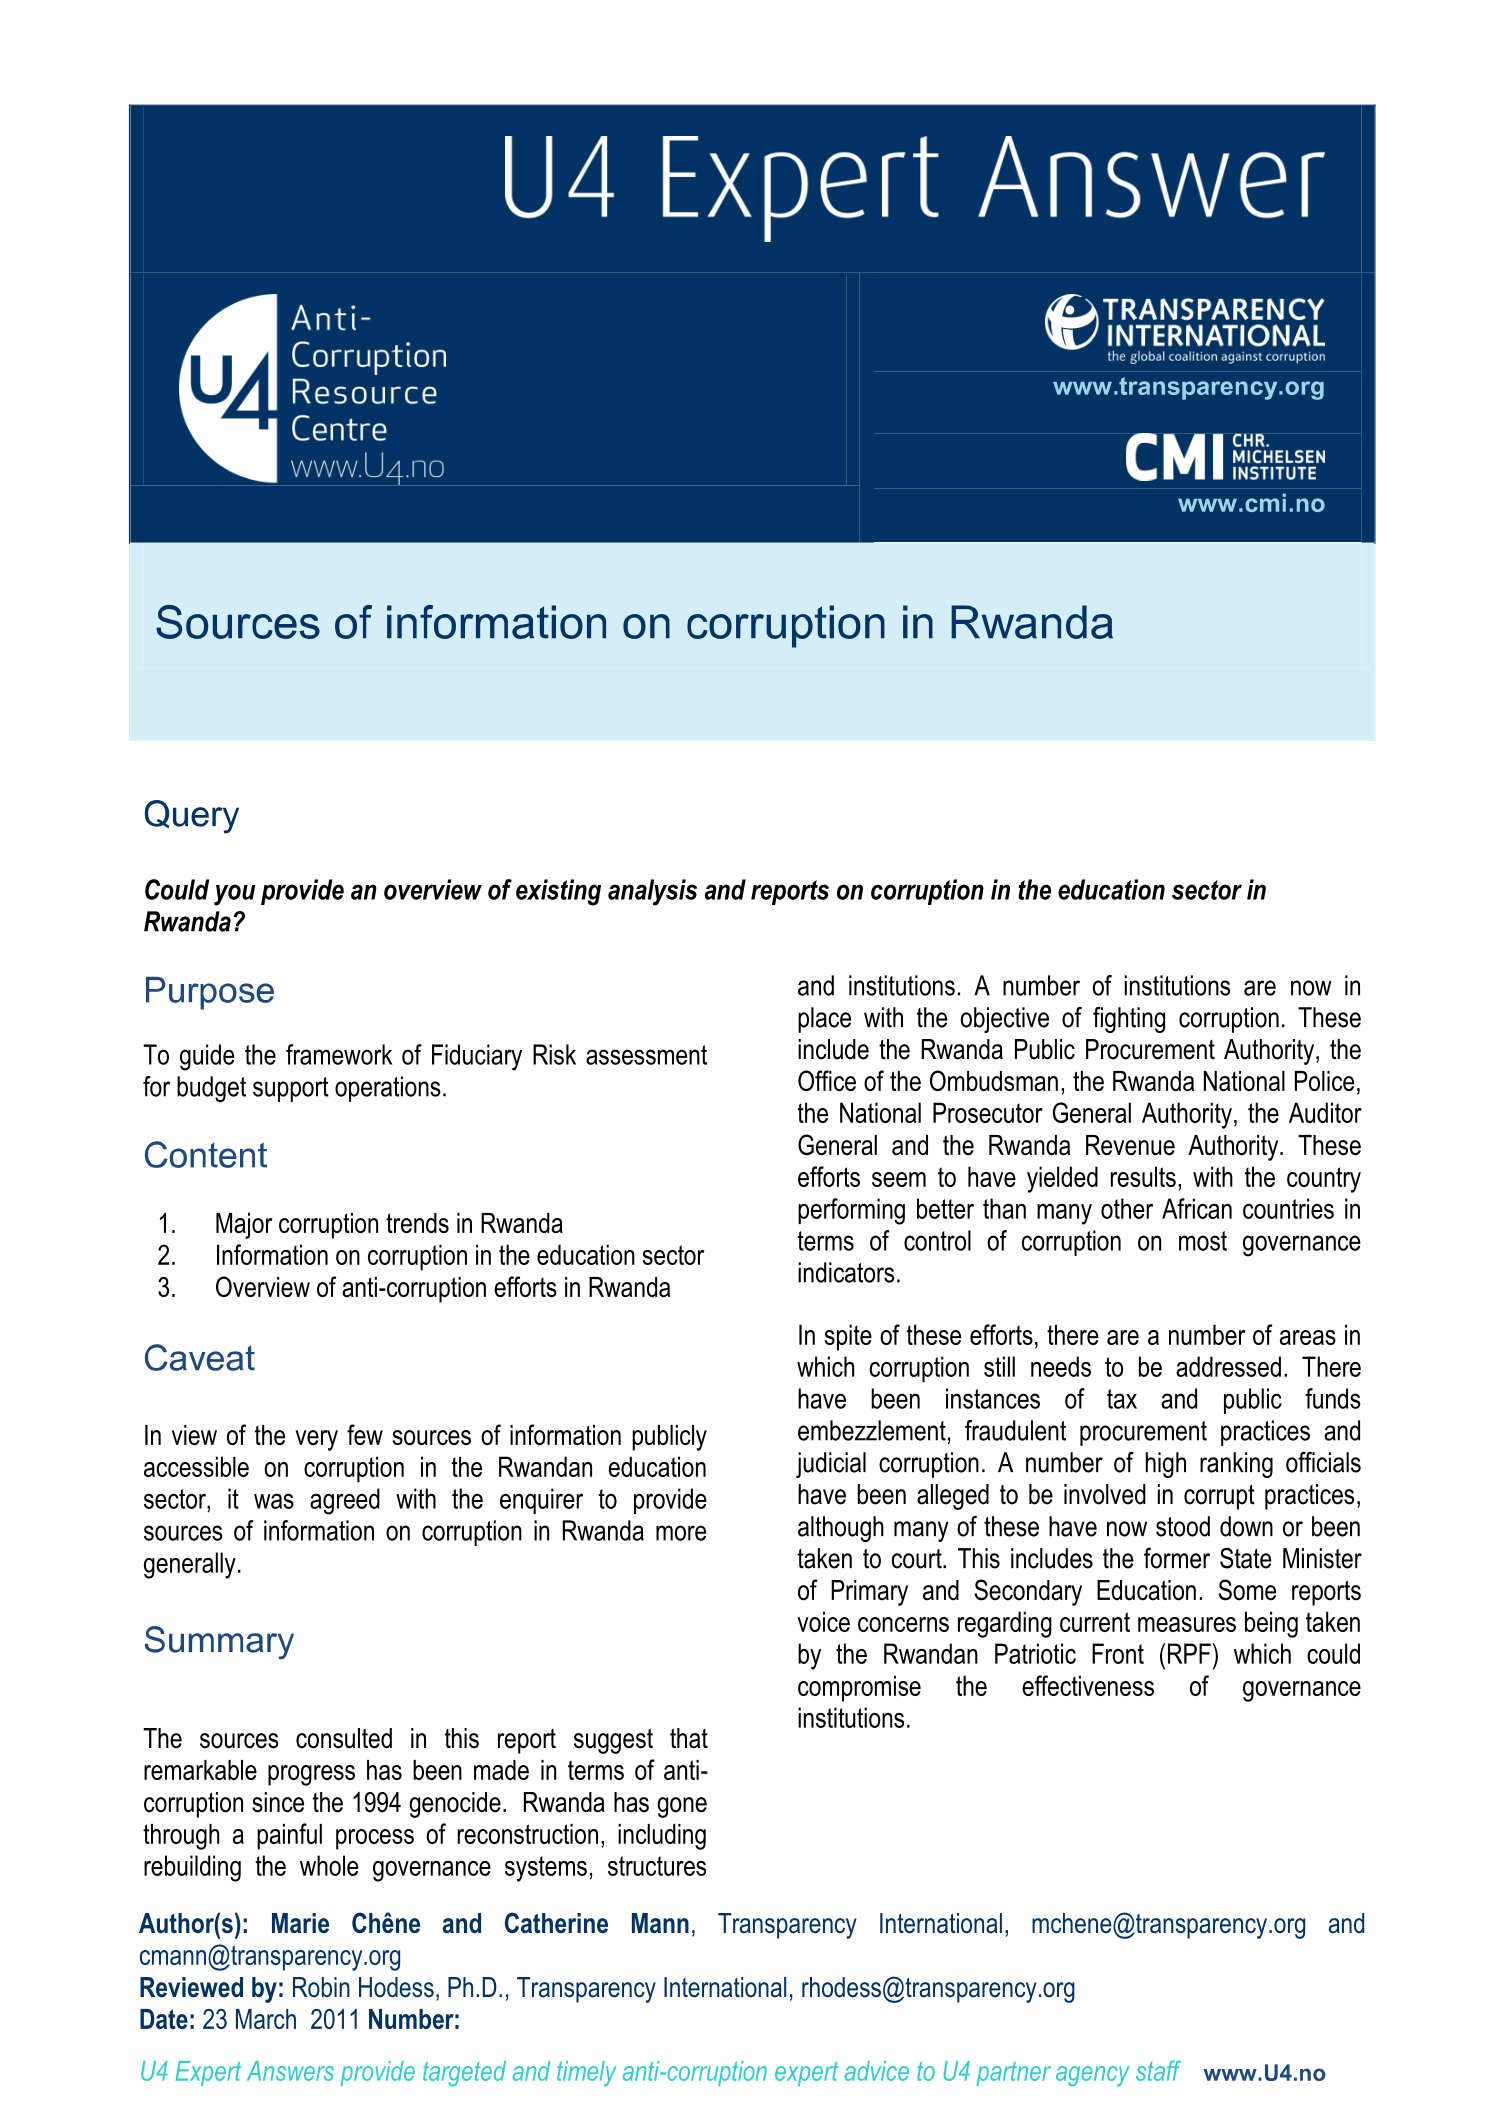 Sources of information on corruption in Rwanda